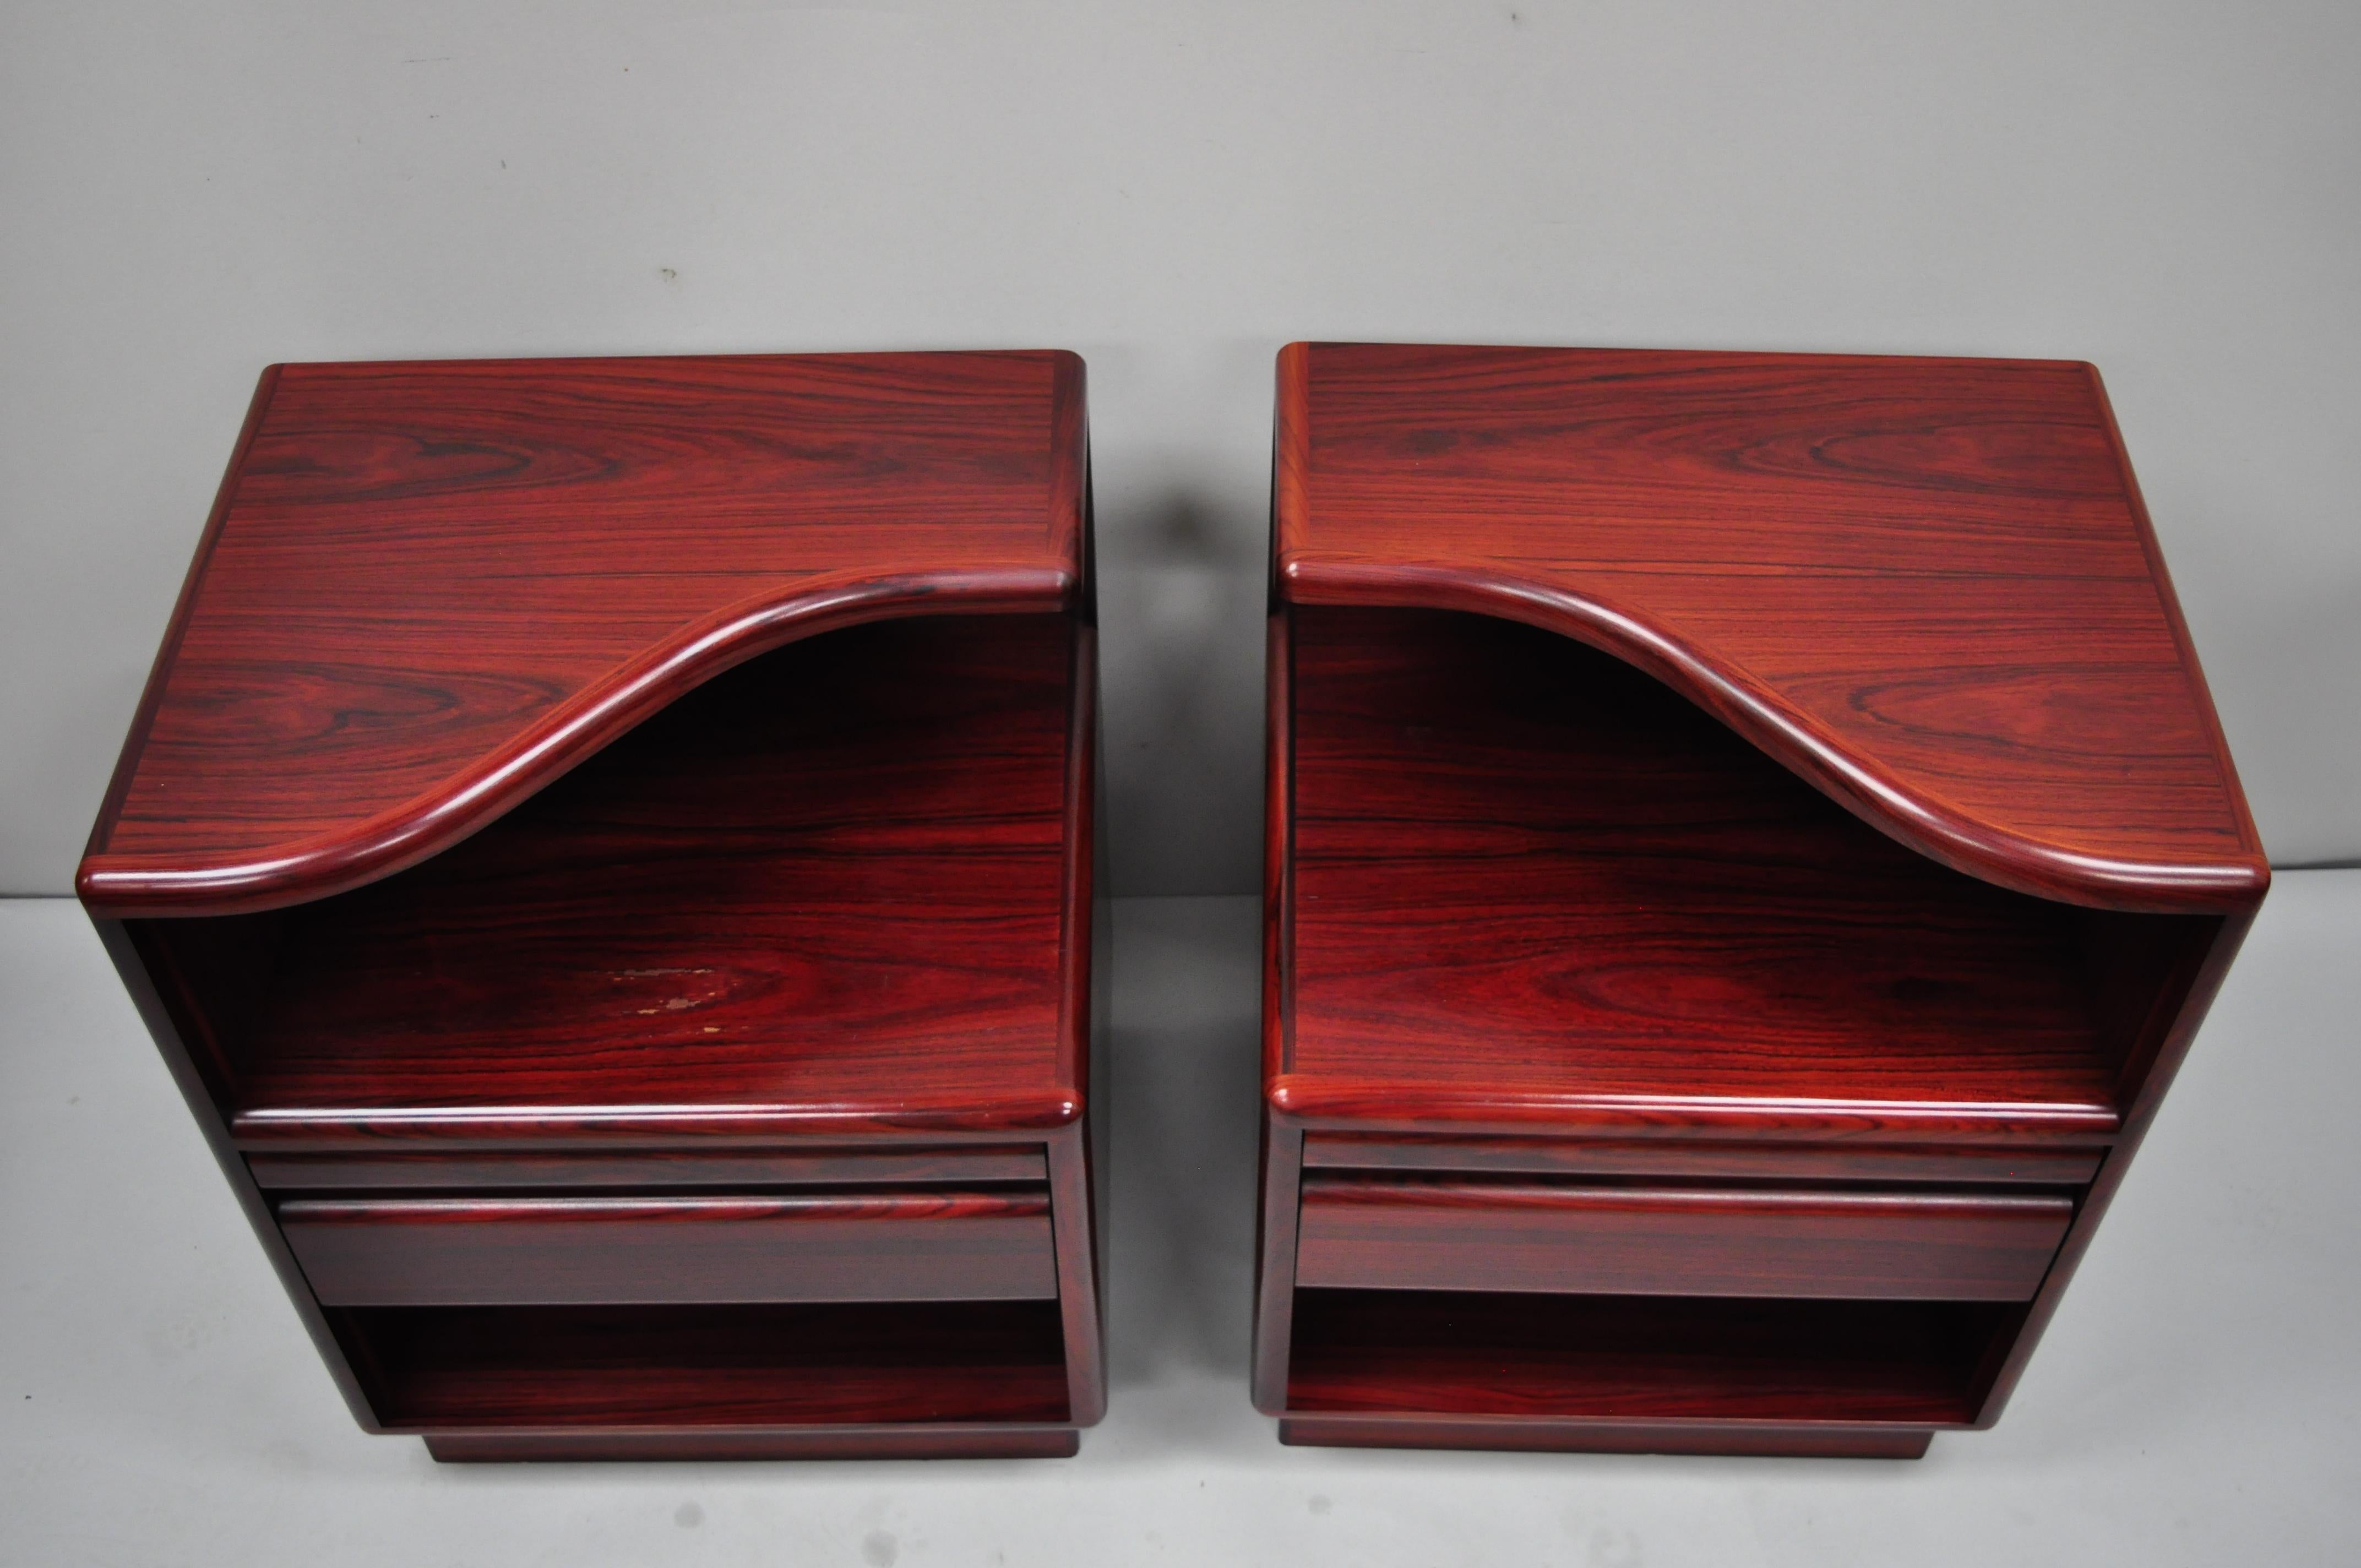 Canadian Pair of Mid-Century Modern Danish Modern Rosewood Nightstands Tables by Mobican